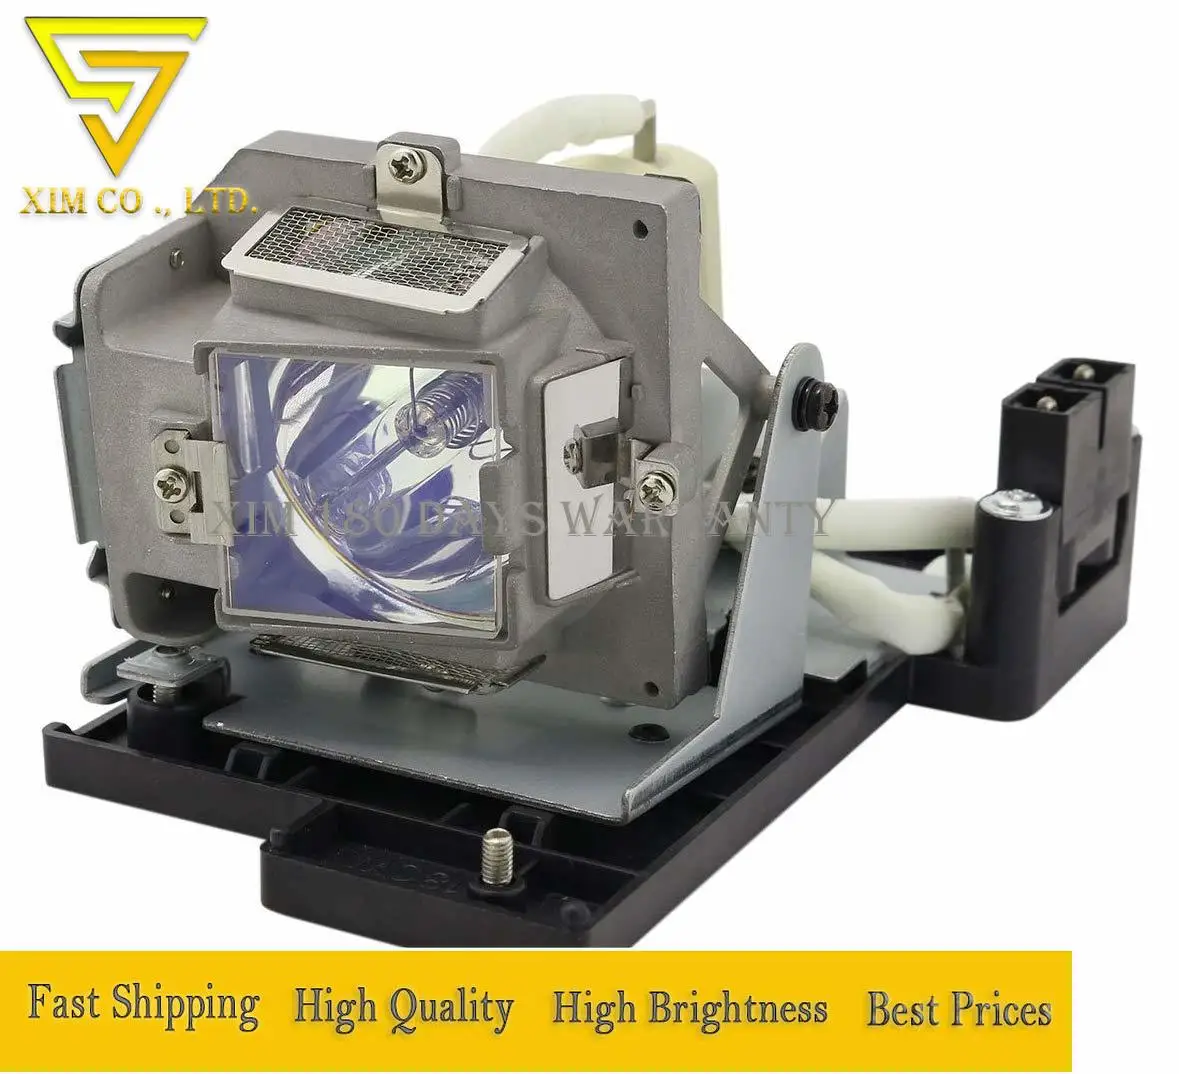 

BL-FP180C DE.5811100256-S Replacement Projector Lamp with Housing fit OPTOMA TX735 ES520 ES530 EX530 TS725 DS611 DX612 projector